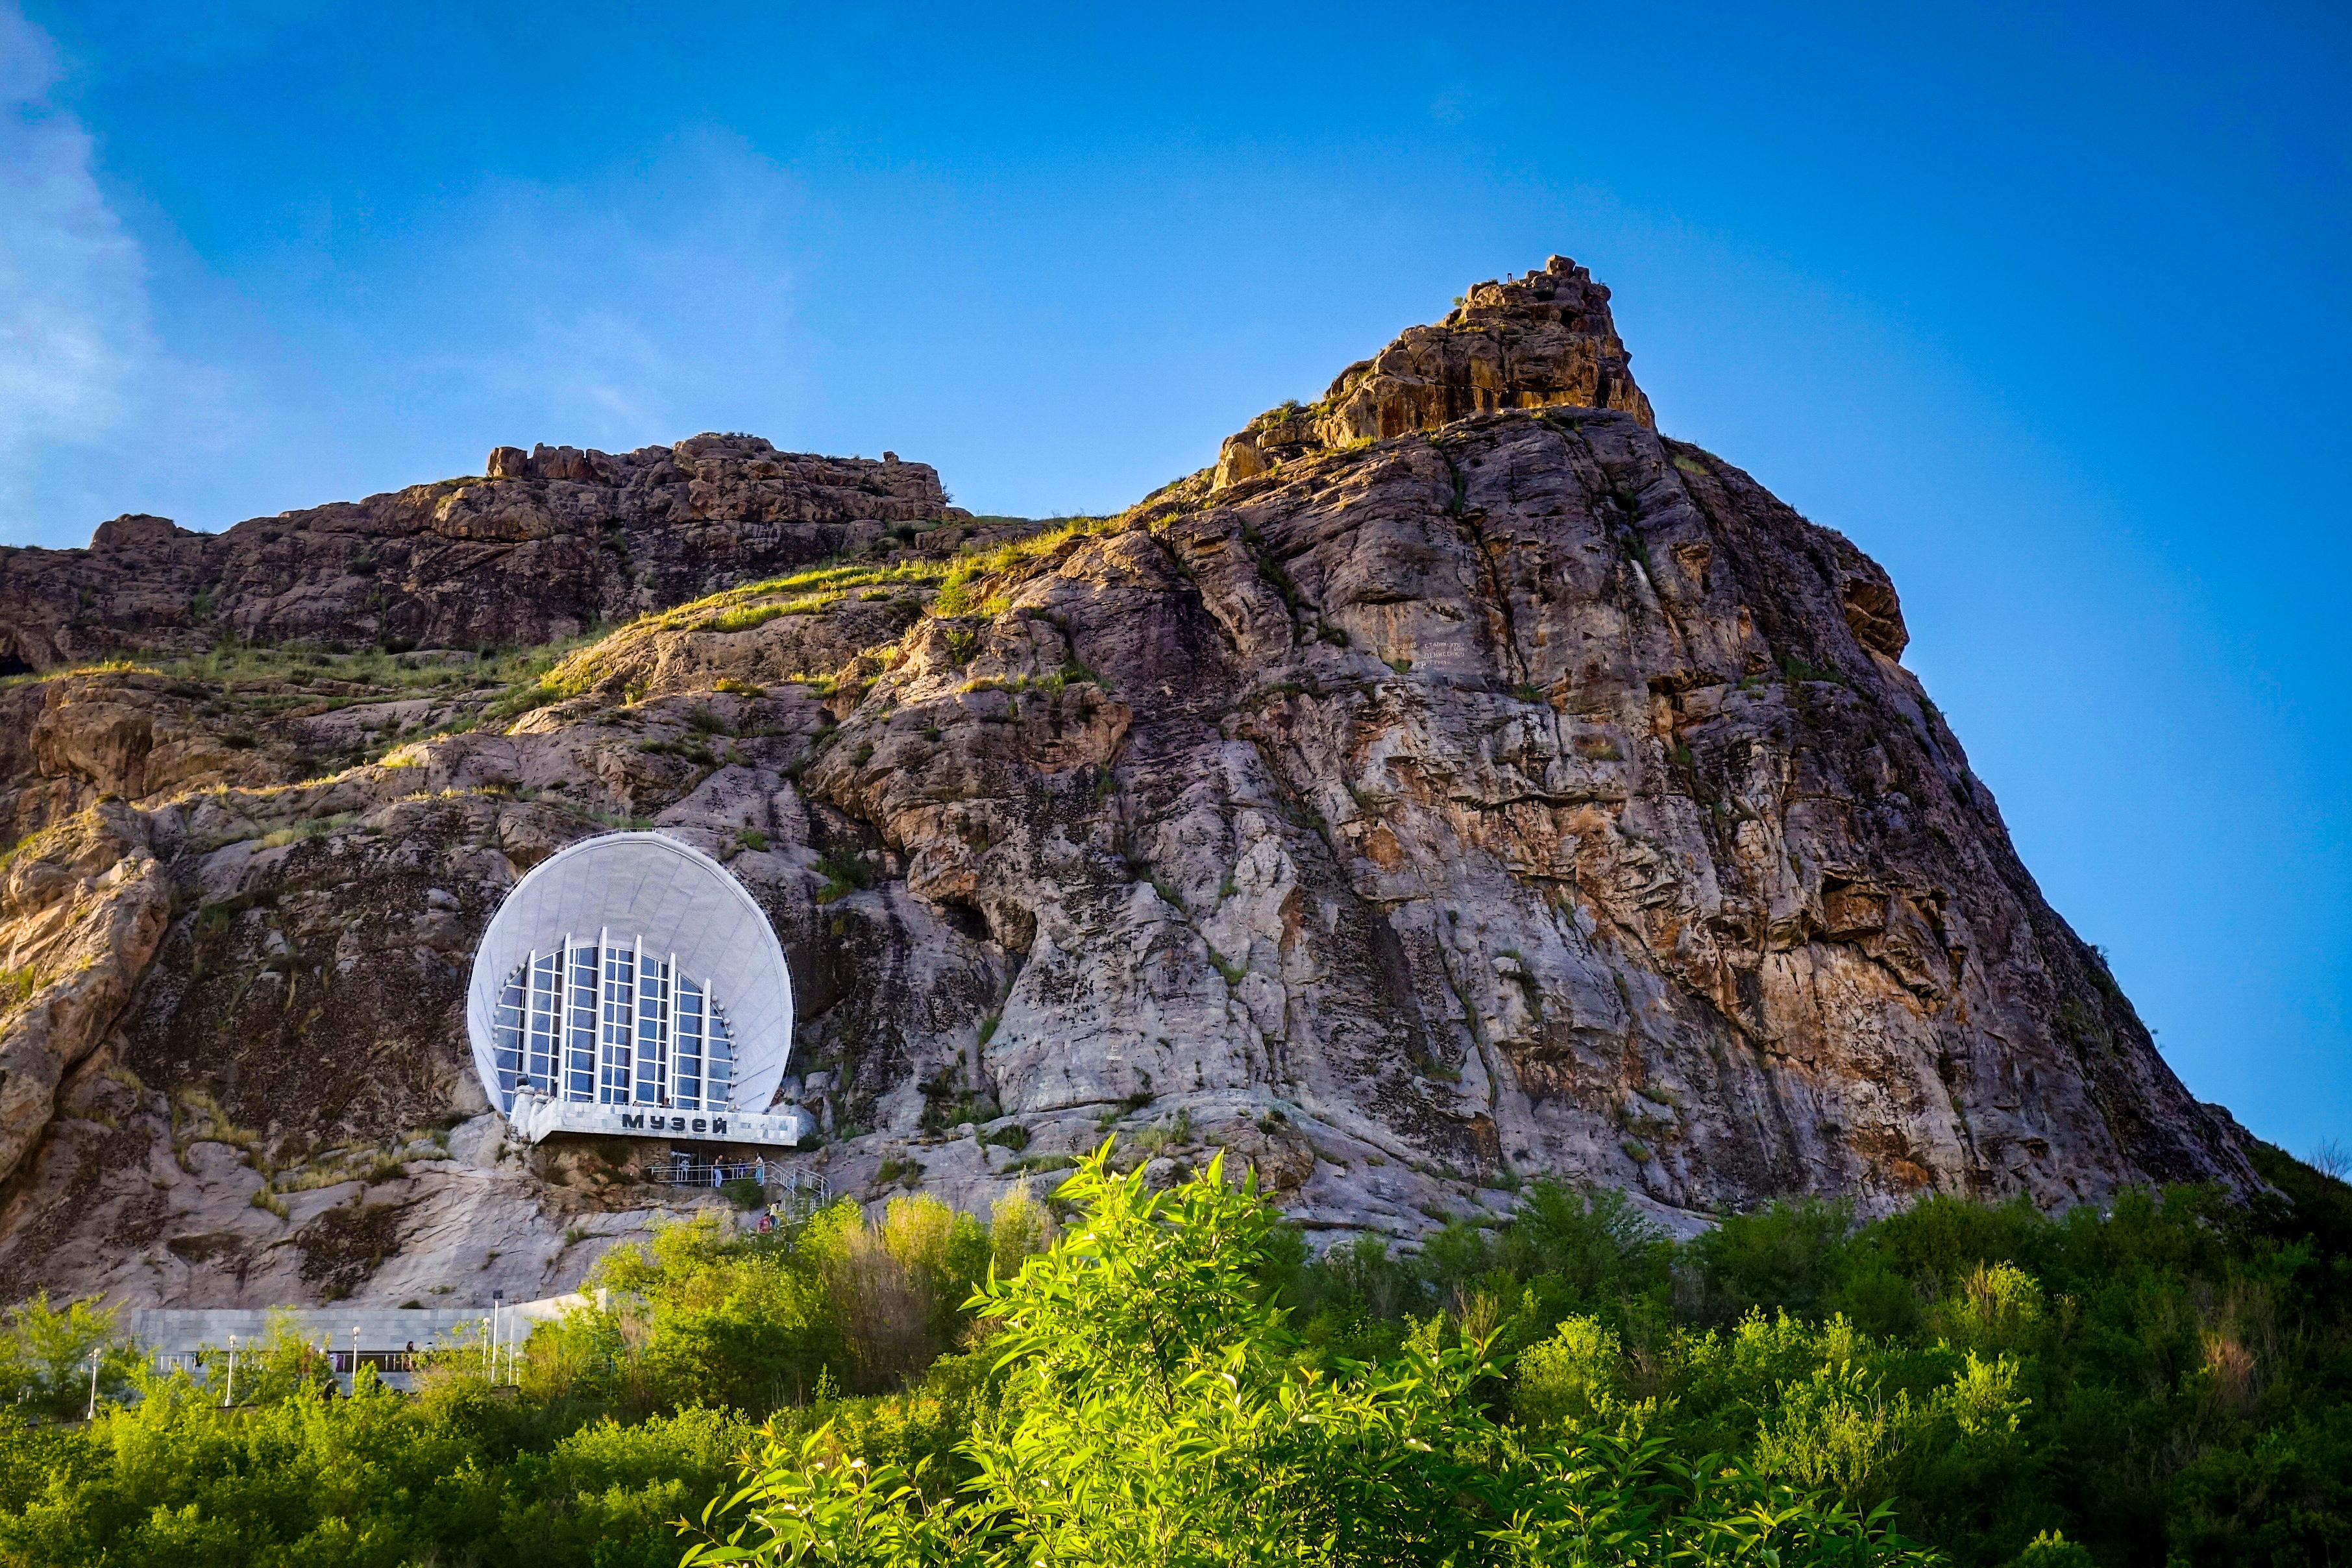 View of the Cave Museum and the mountain peak
Photo by Kylie Nicholson / Shutterstock